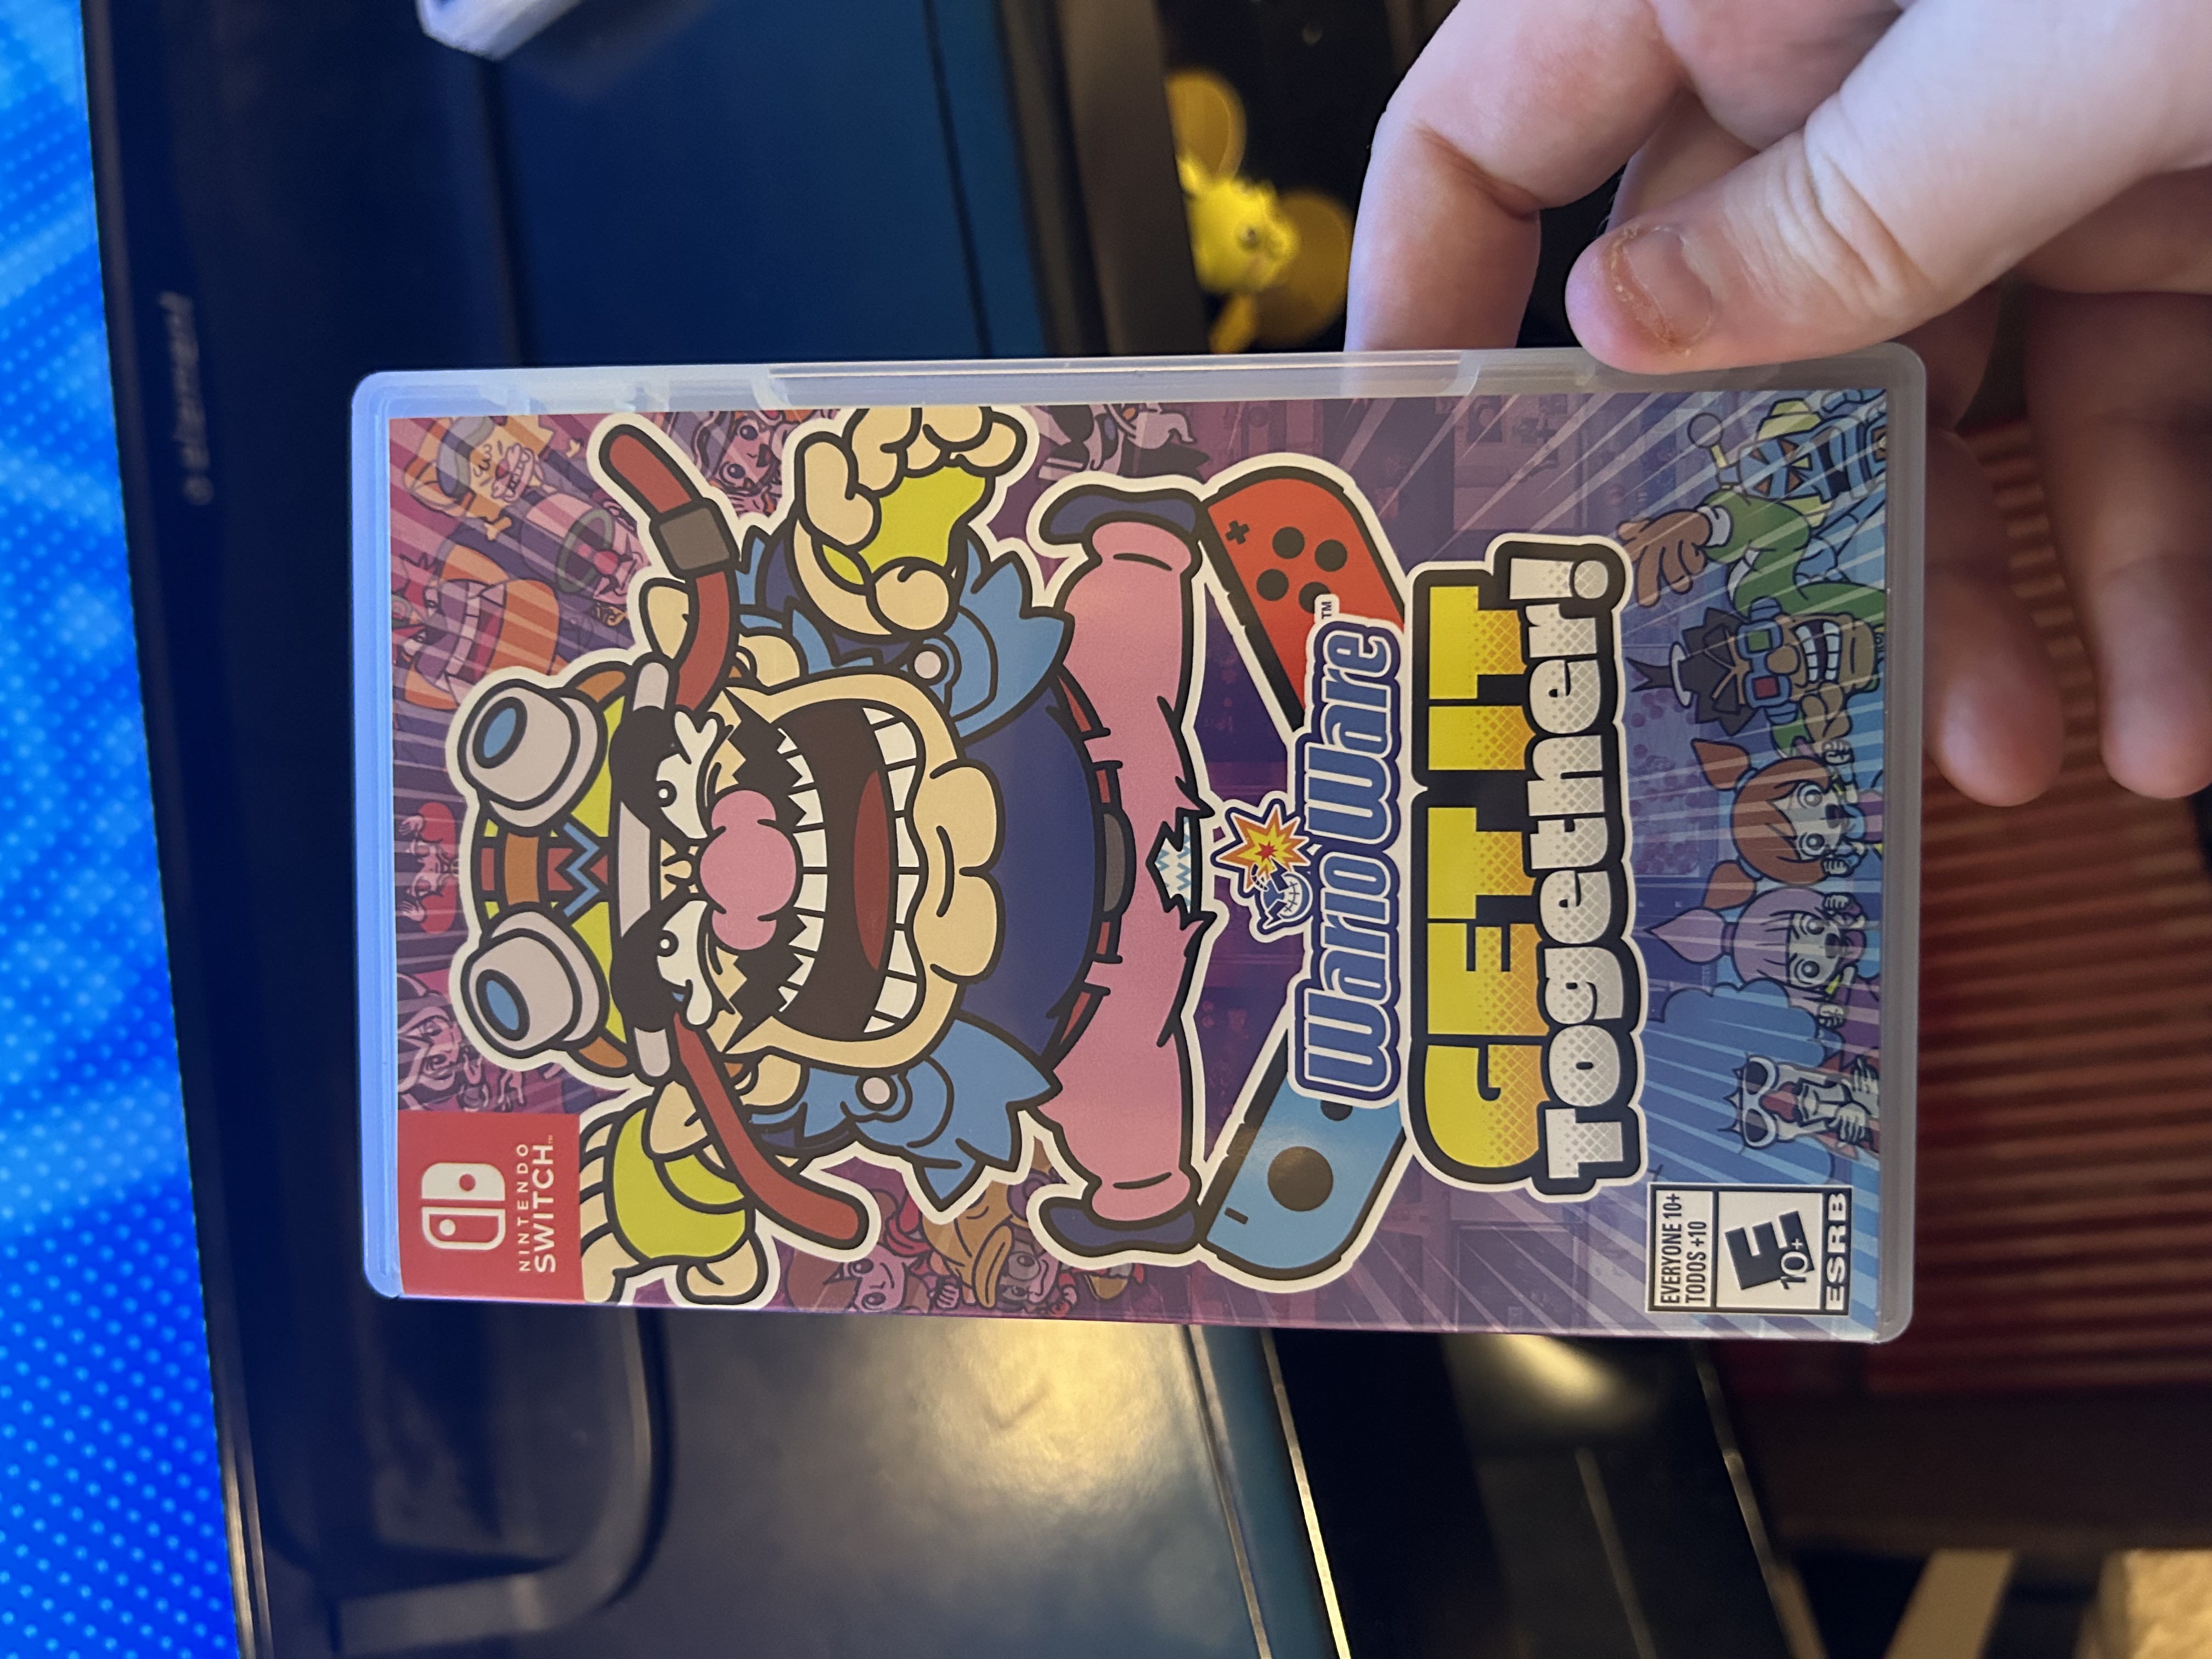 WarioWare Get It Together! - Nintendo Switch by NGMRX on DeviantArt